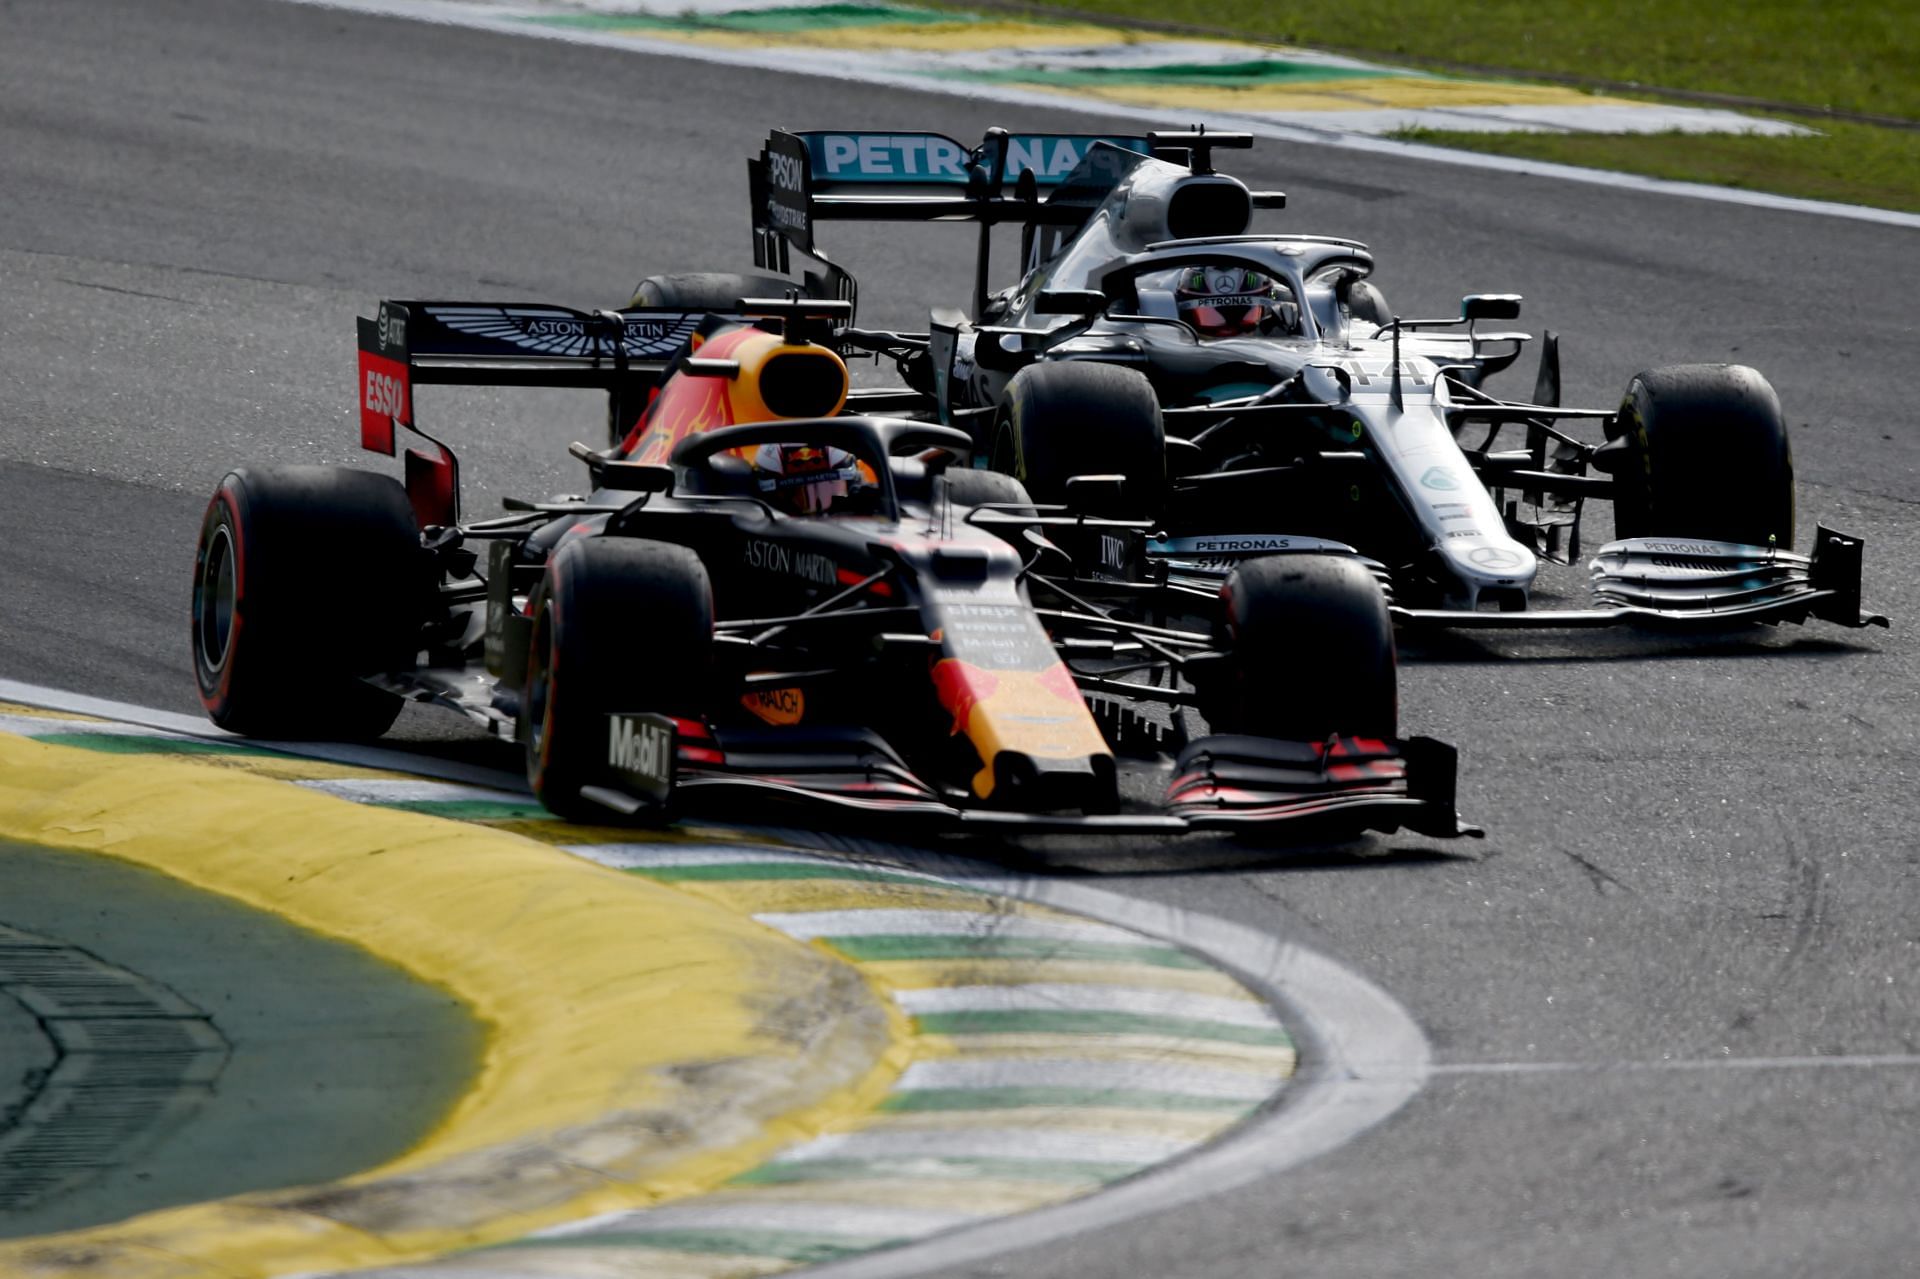 Max Verstappen and Lewis Hamilton at the Brazil Grand Prix. (Photo by Charles Coates/Getty Images)